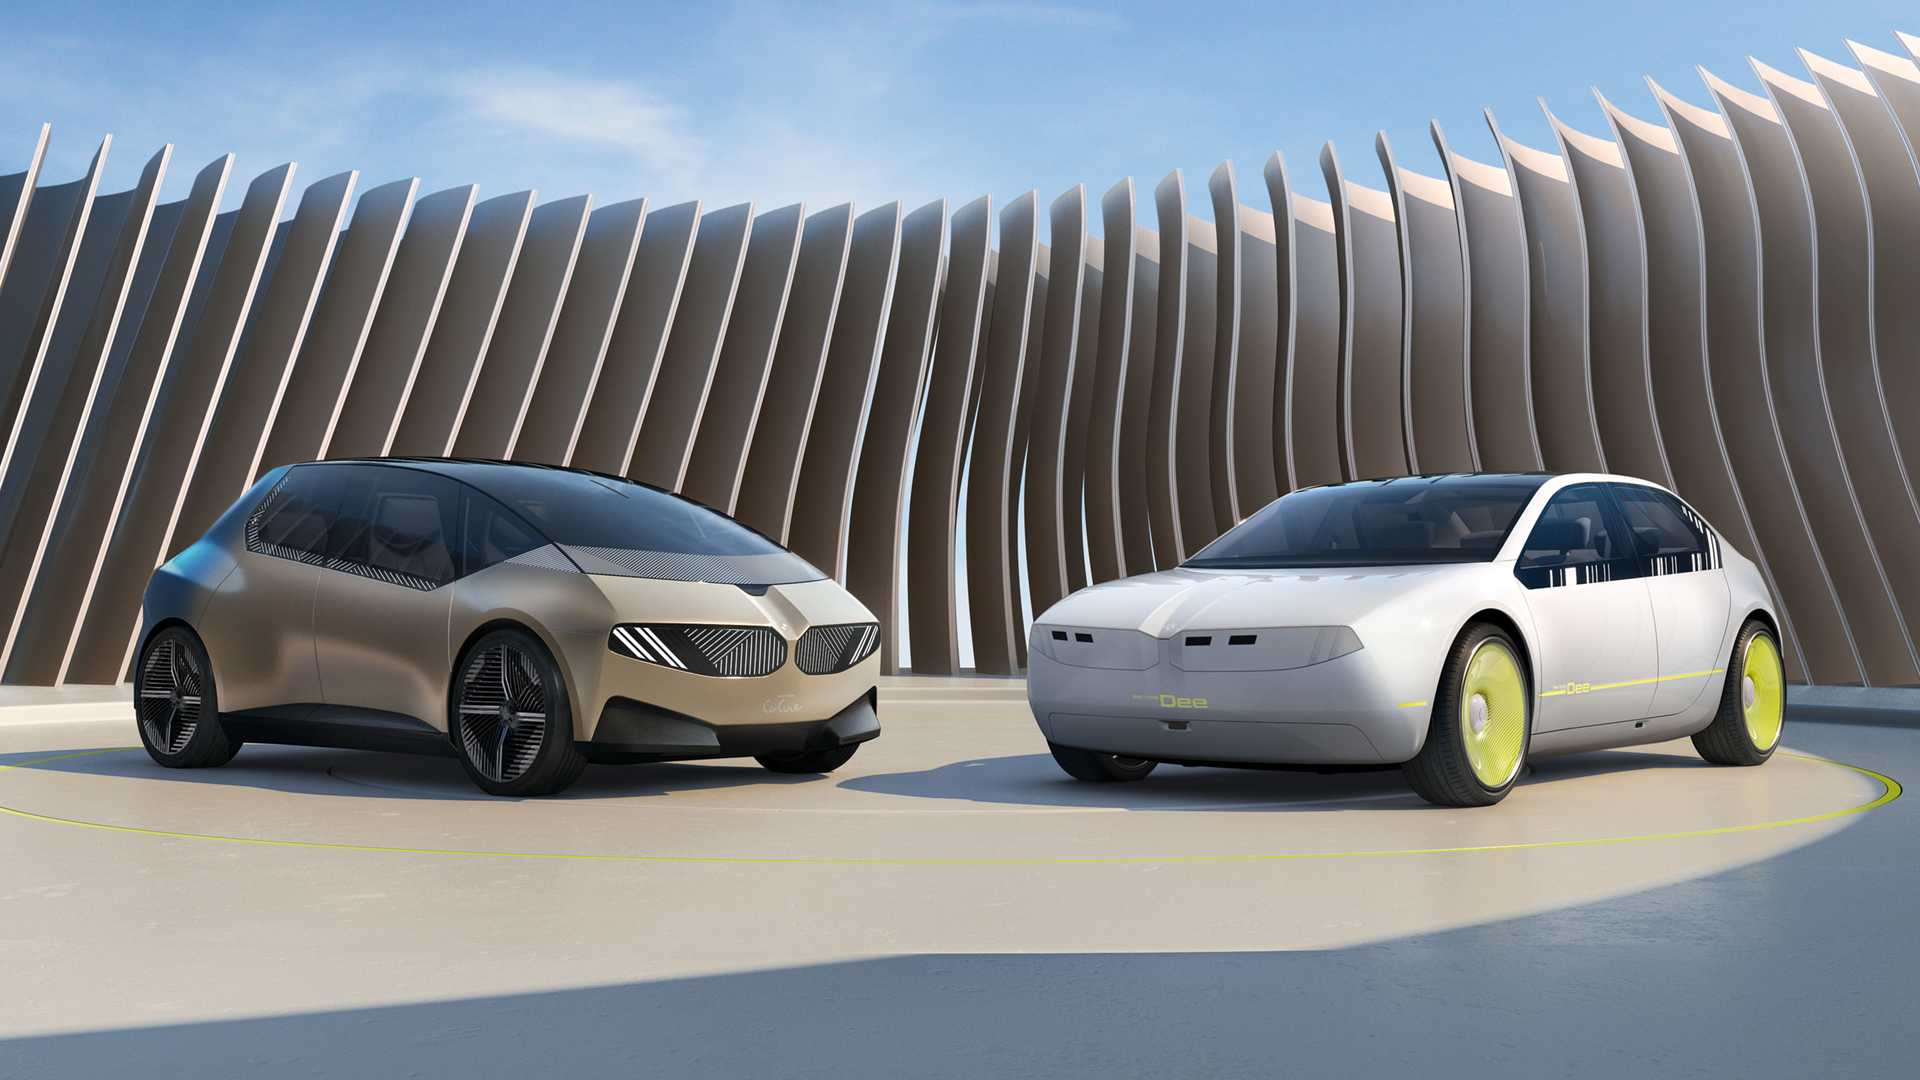 BMW unveiled the i Vision Dee chameleon concept car, which can change body color and express emotions